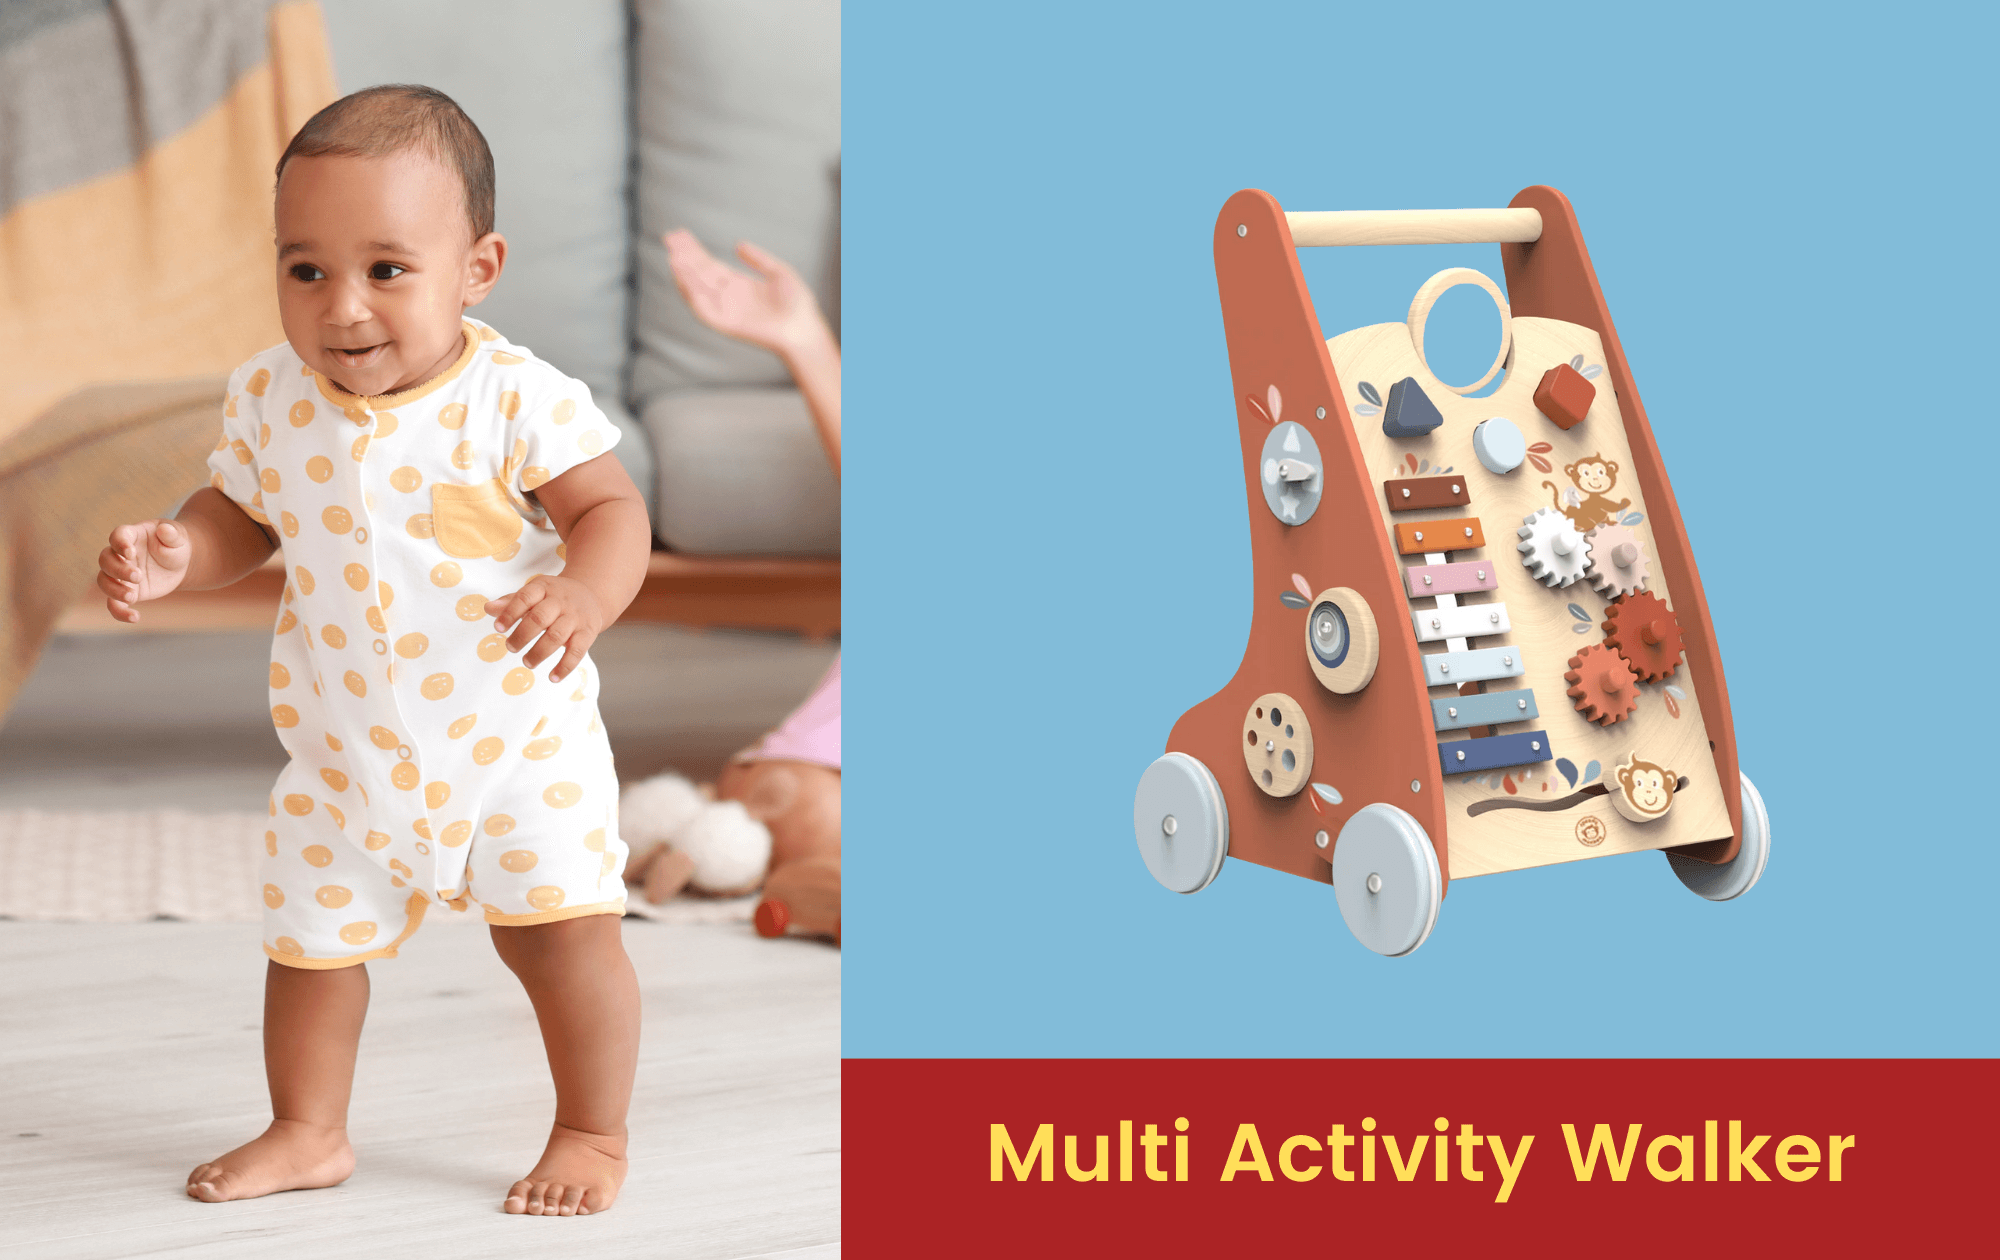 Toddler excited to learn to walk on their multi activity walker, Toyworld Toy Kindgom Byron Bay Lismore